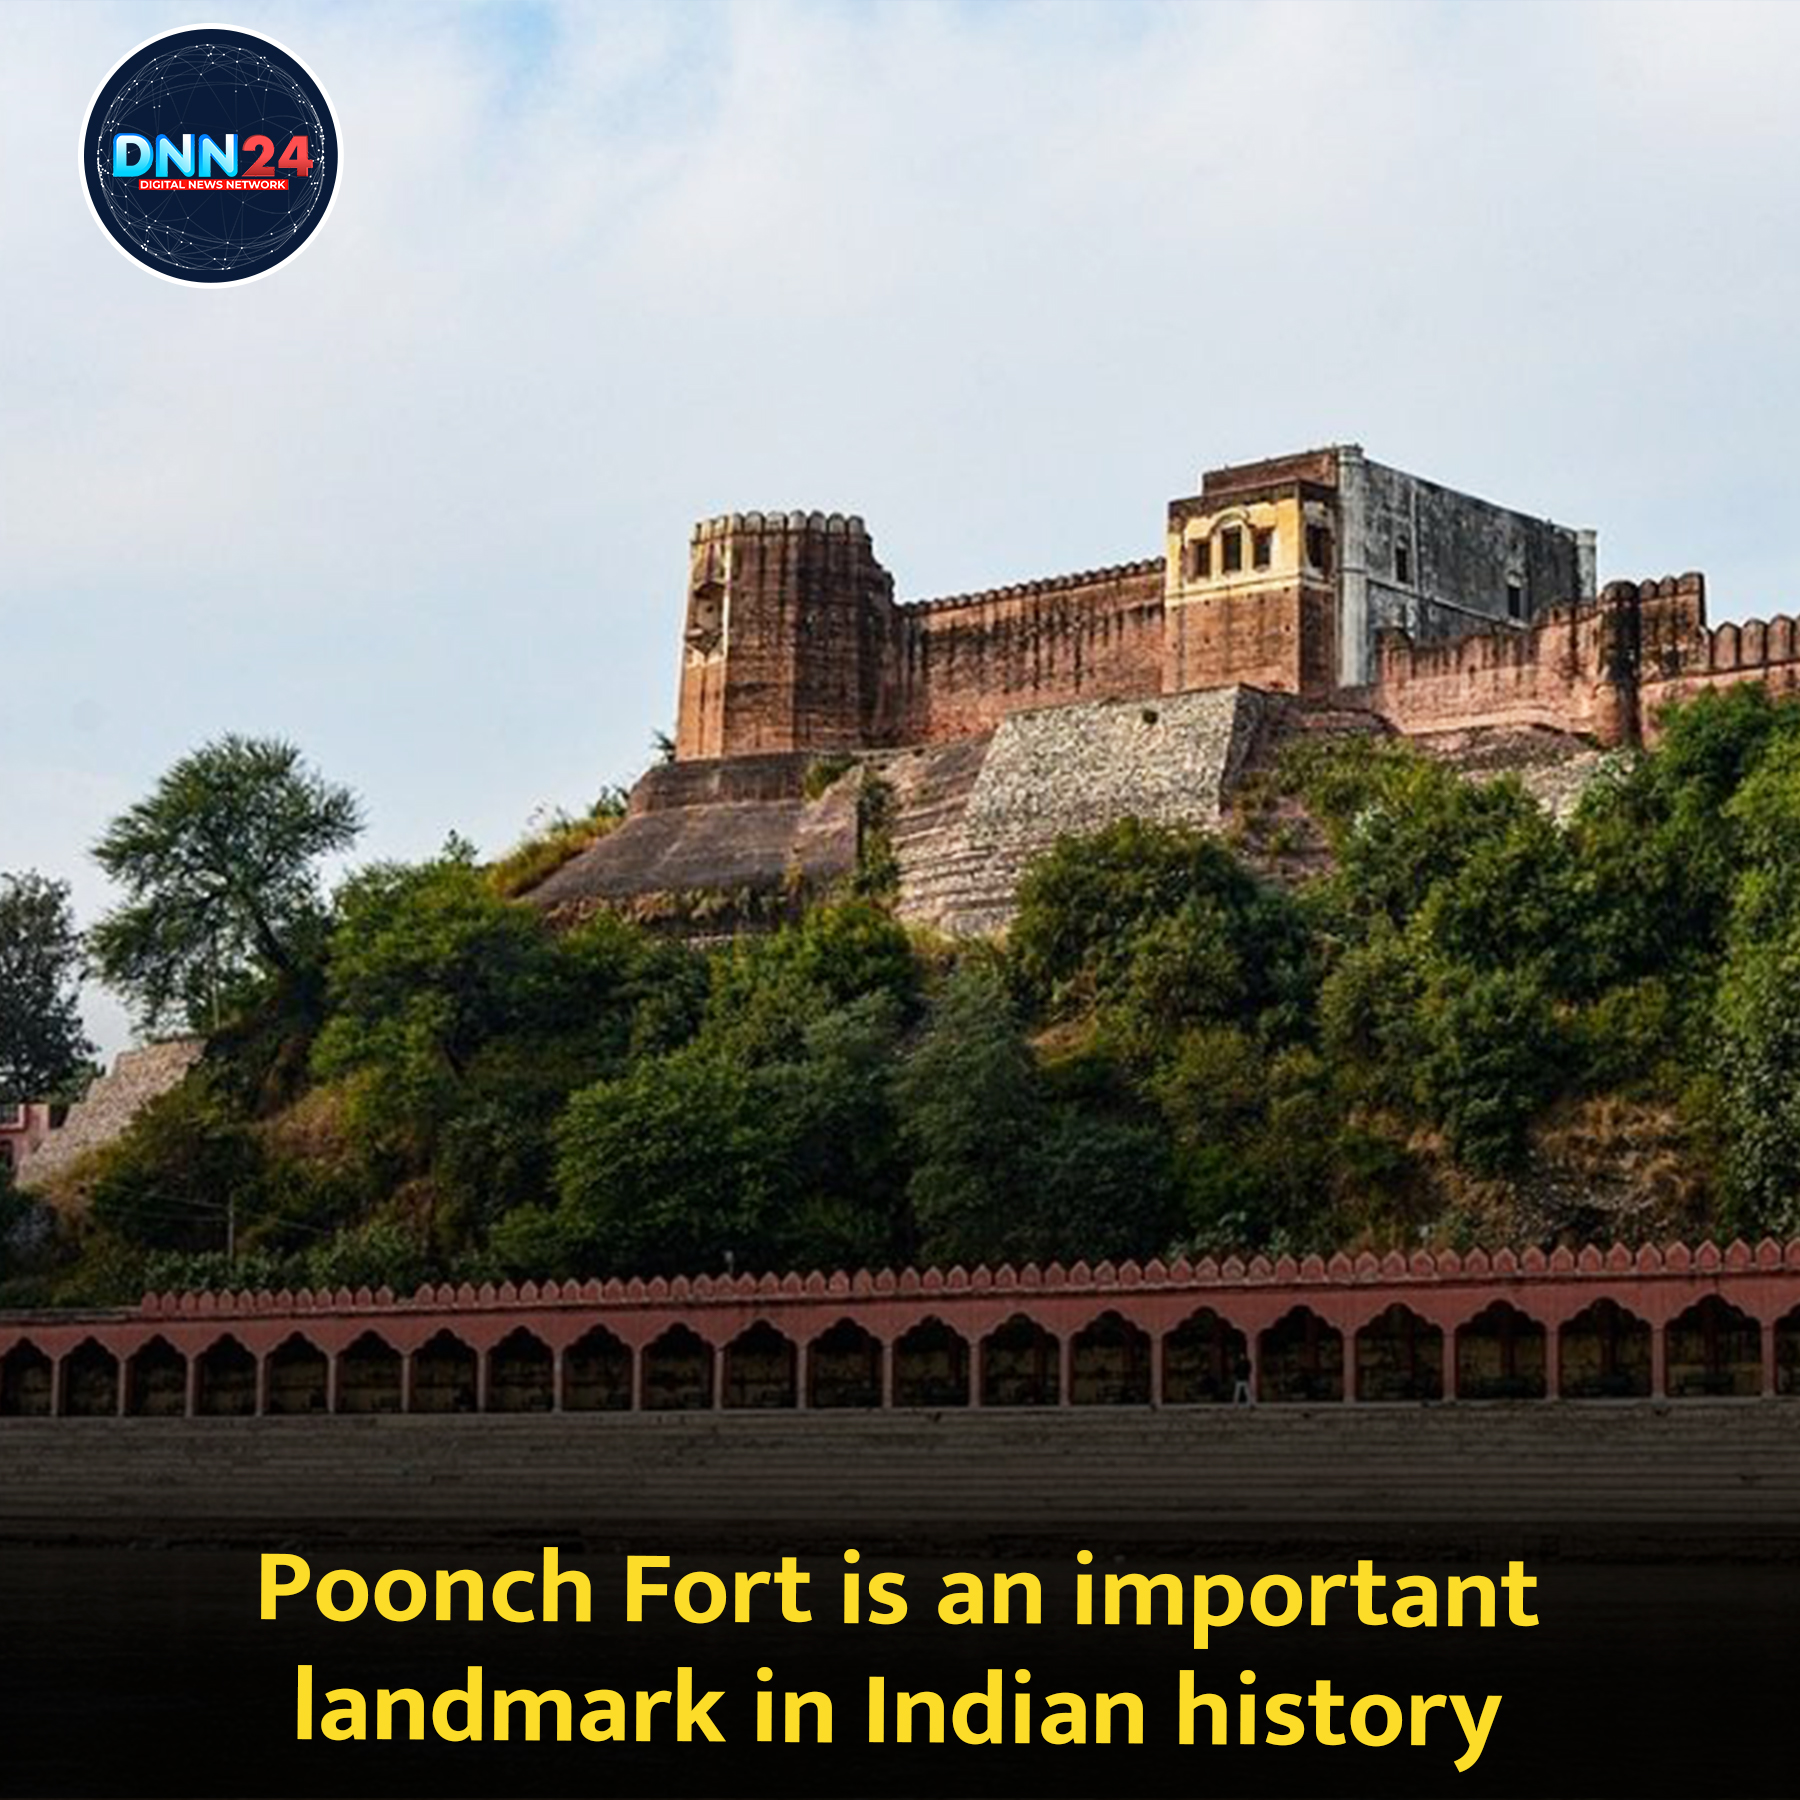 Poonch Fort